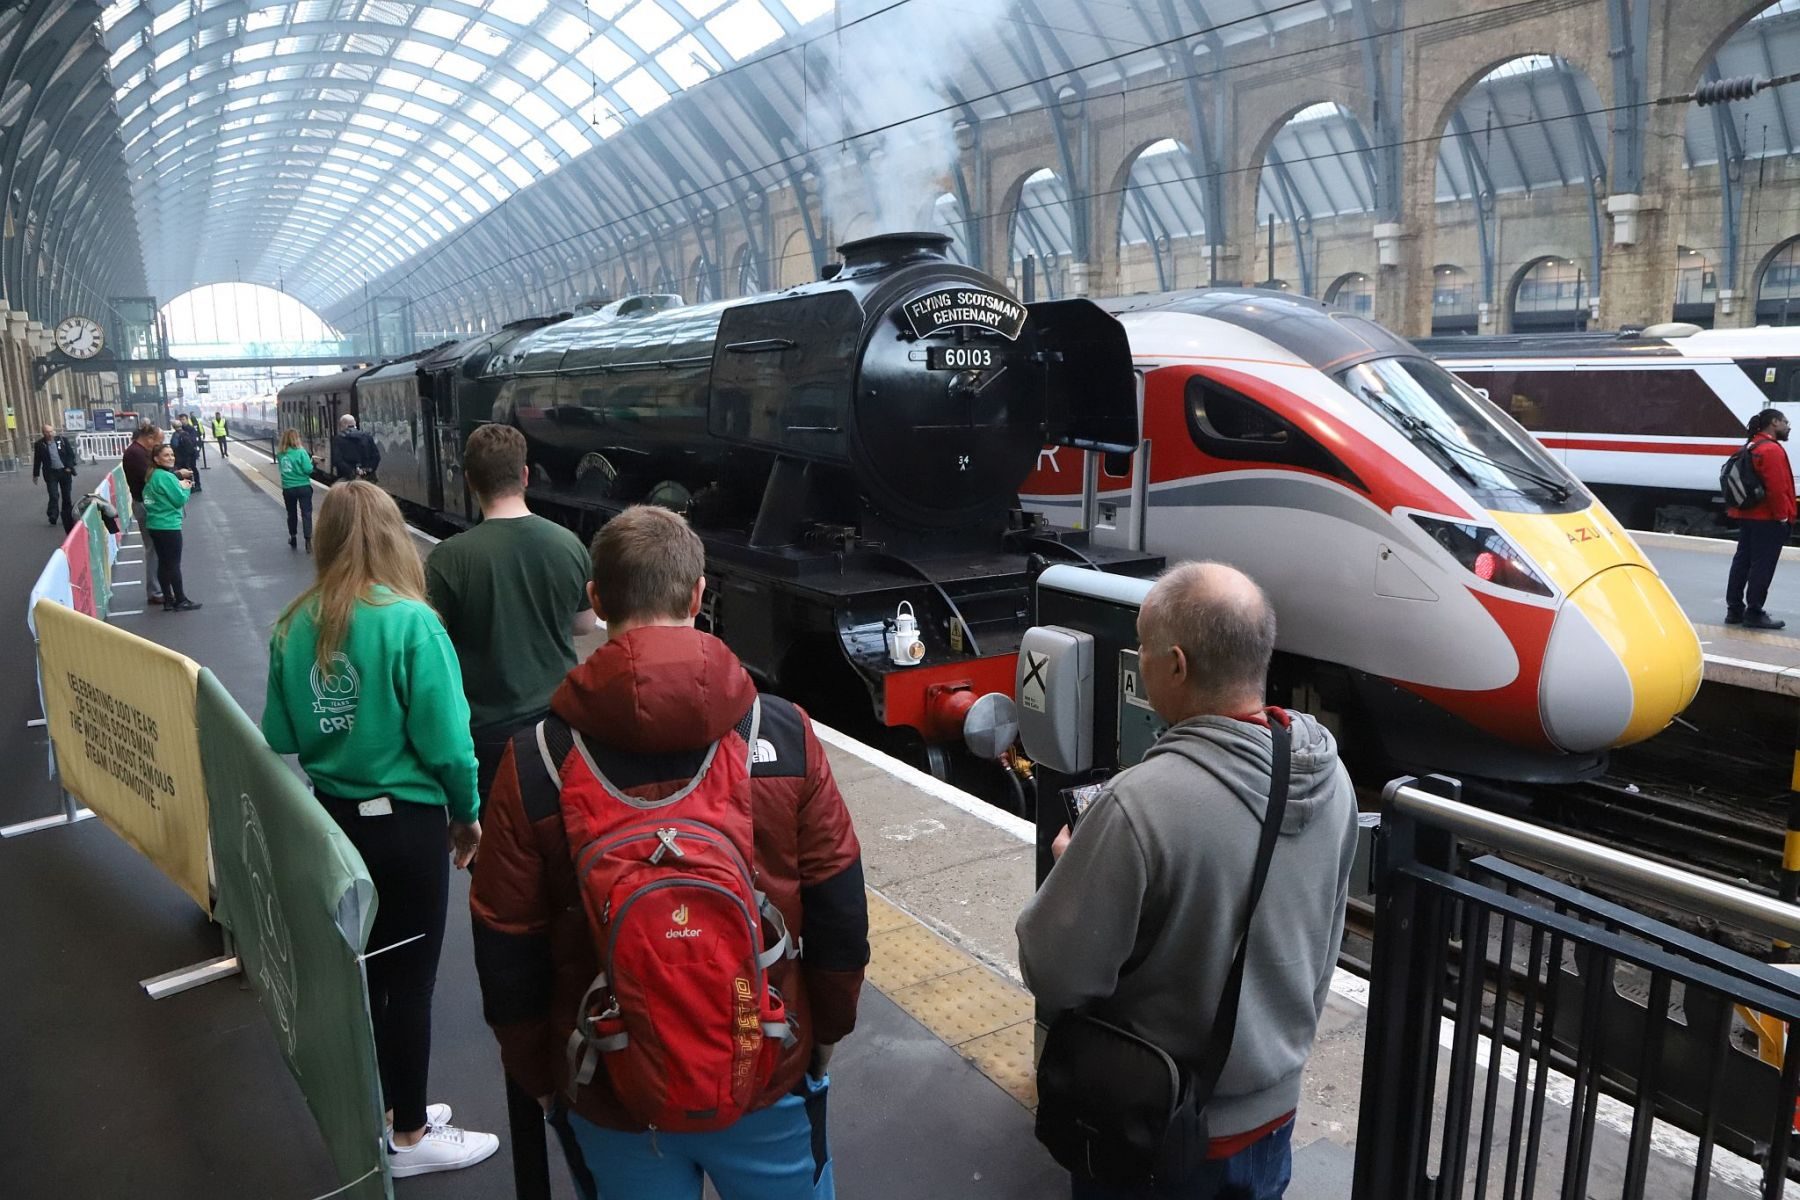 Crowd on platform next to steam engine Flying Scotsman with an Azuma train next to it. Flying Scotsman steam locomotive at King's Cross railway station platform 8 for the 170th anniversary of the station's opening and the start of Flying Scotsman's 100th birthday celebrations